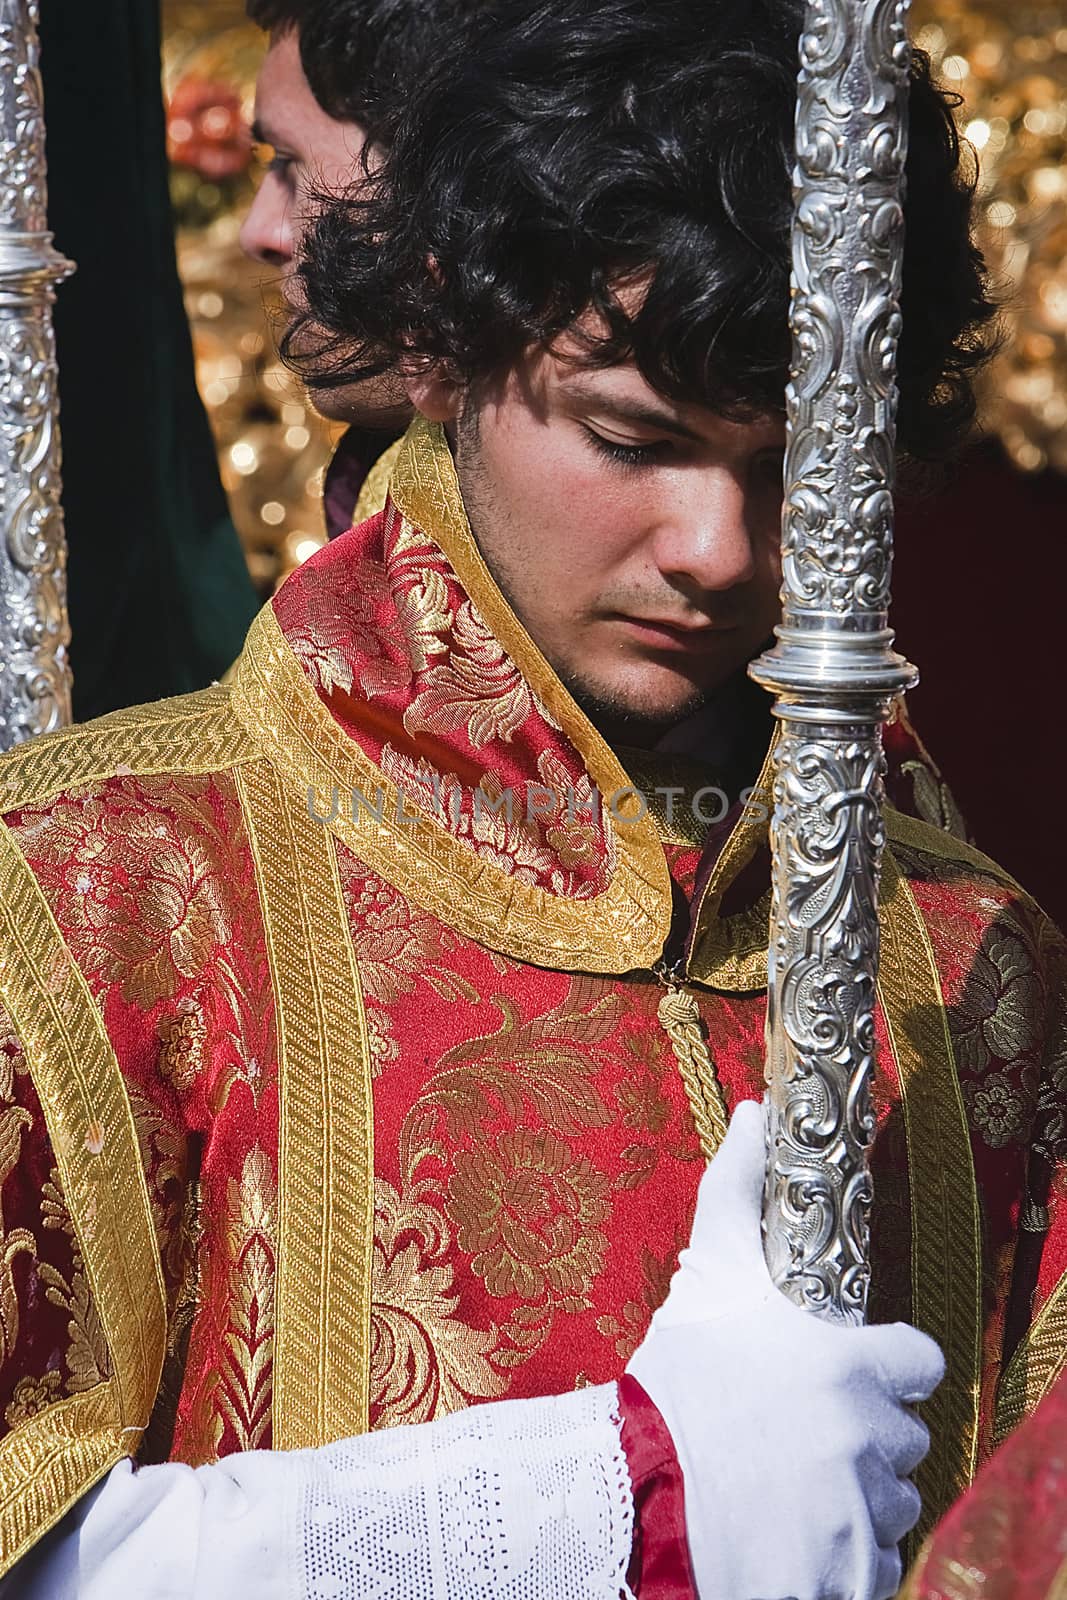 Dalmatic man dressed in a procession during Holy Week, Andalucia, Spain